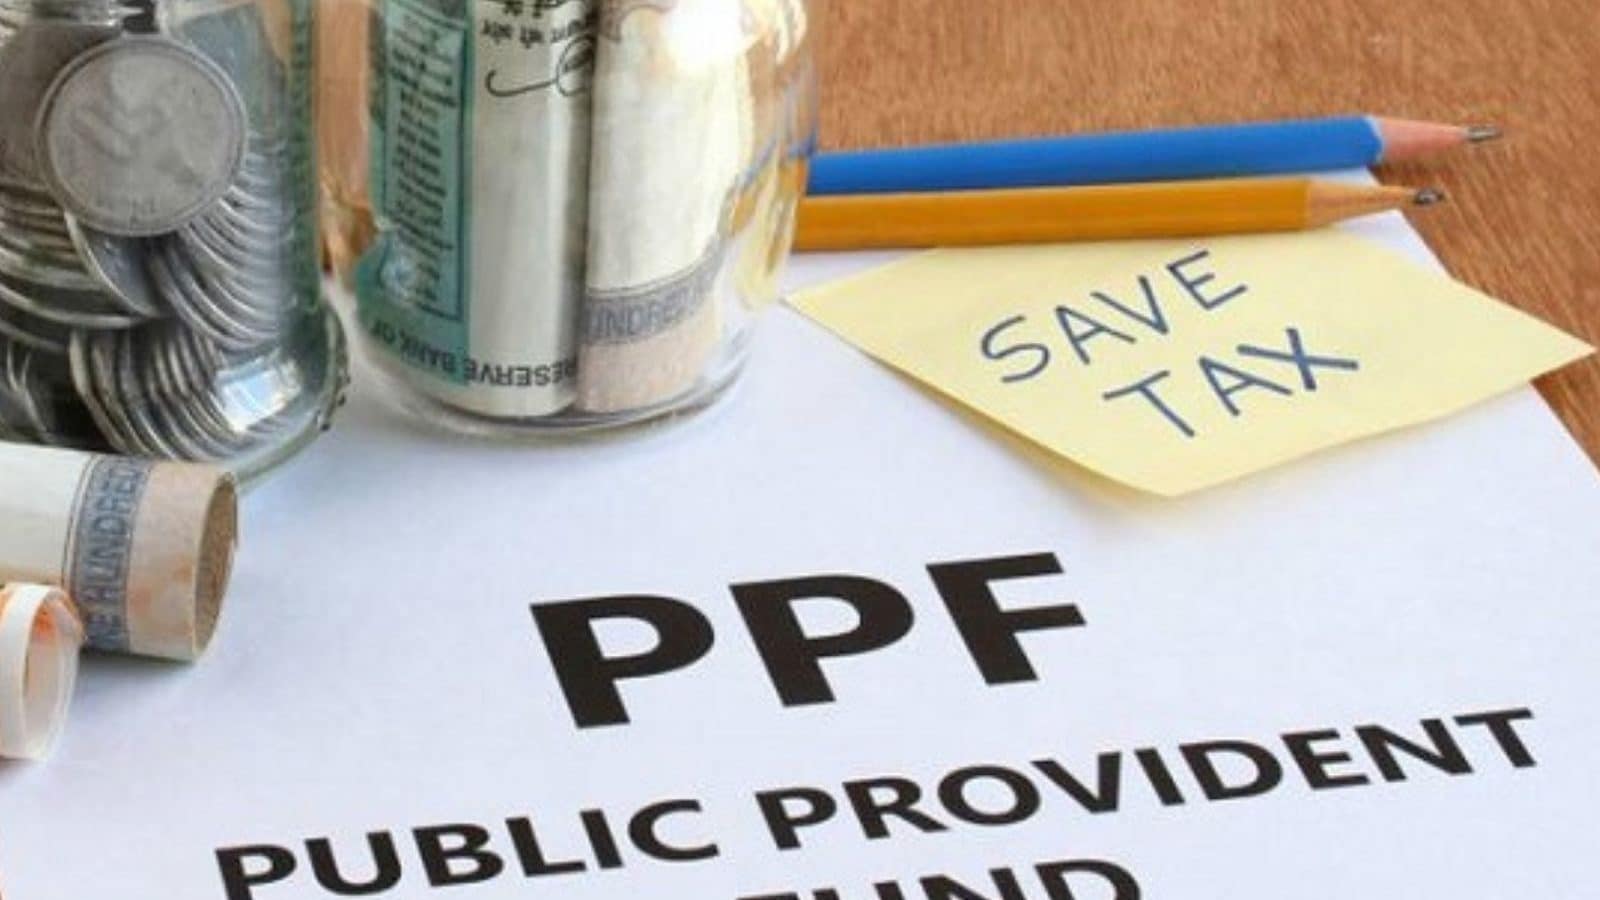 How to use PPF to save Rs 1 Crore: Be PPF Crorepati - Stable Investor